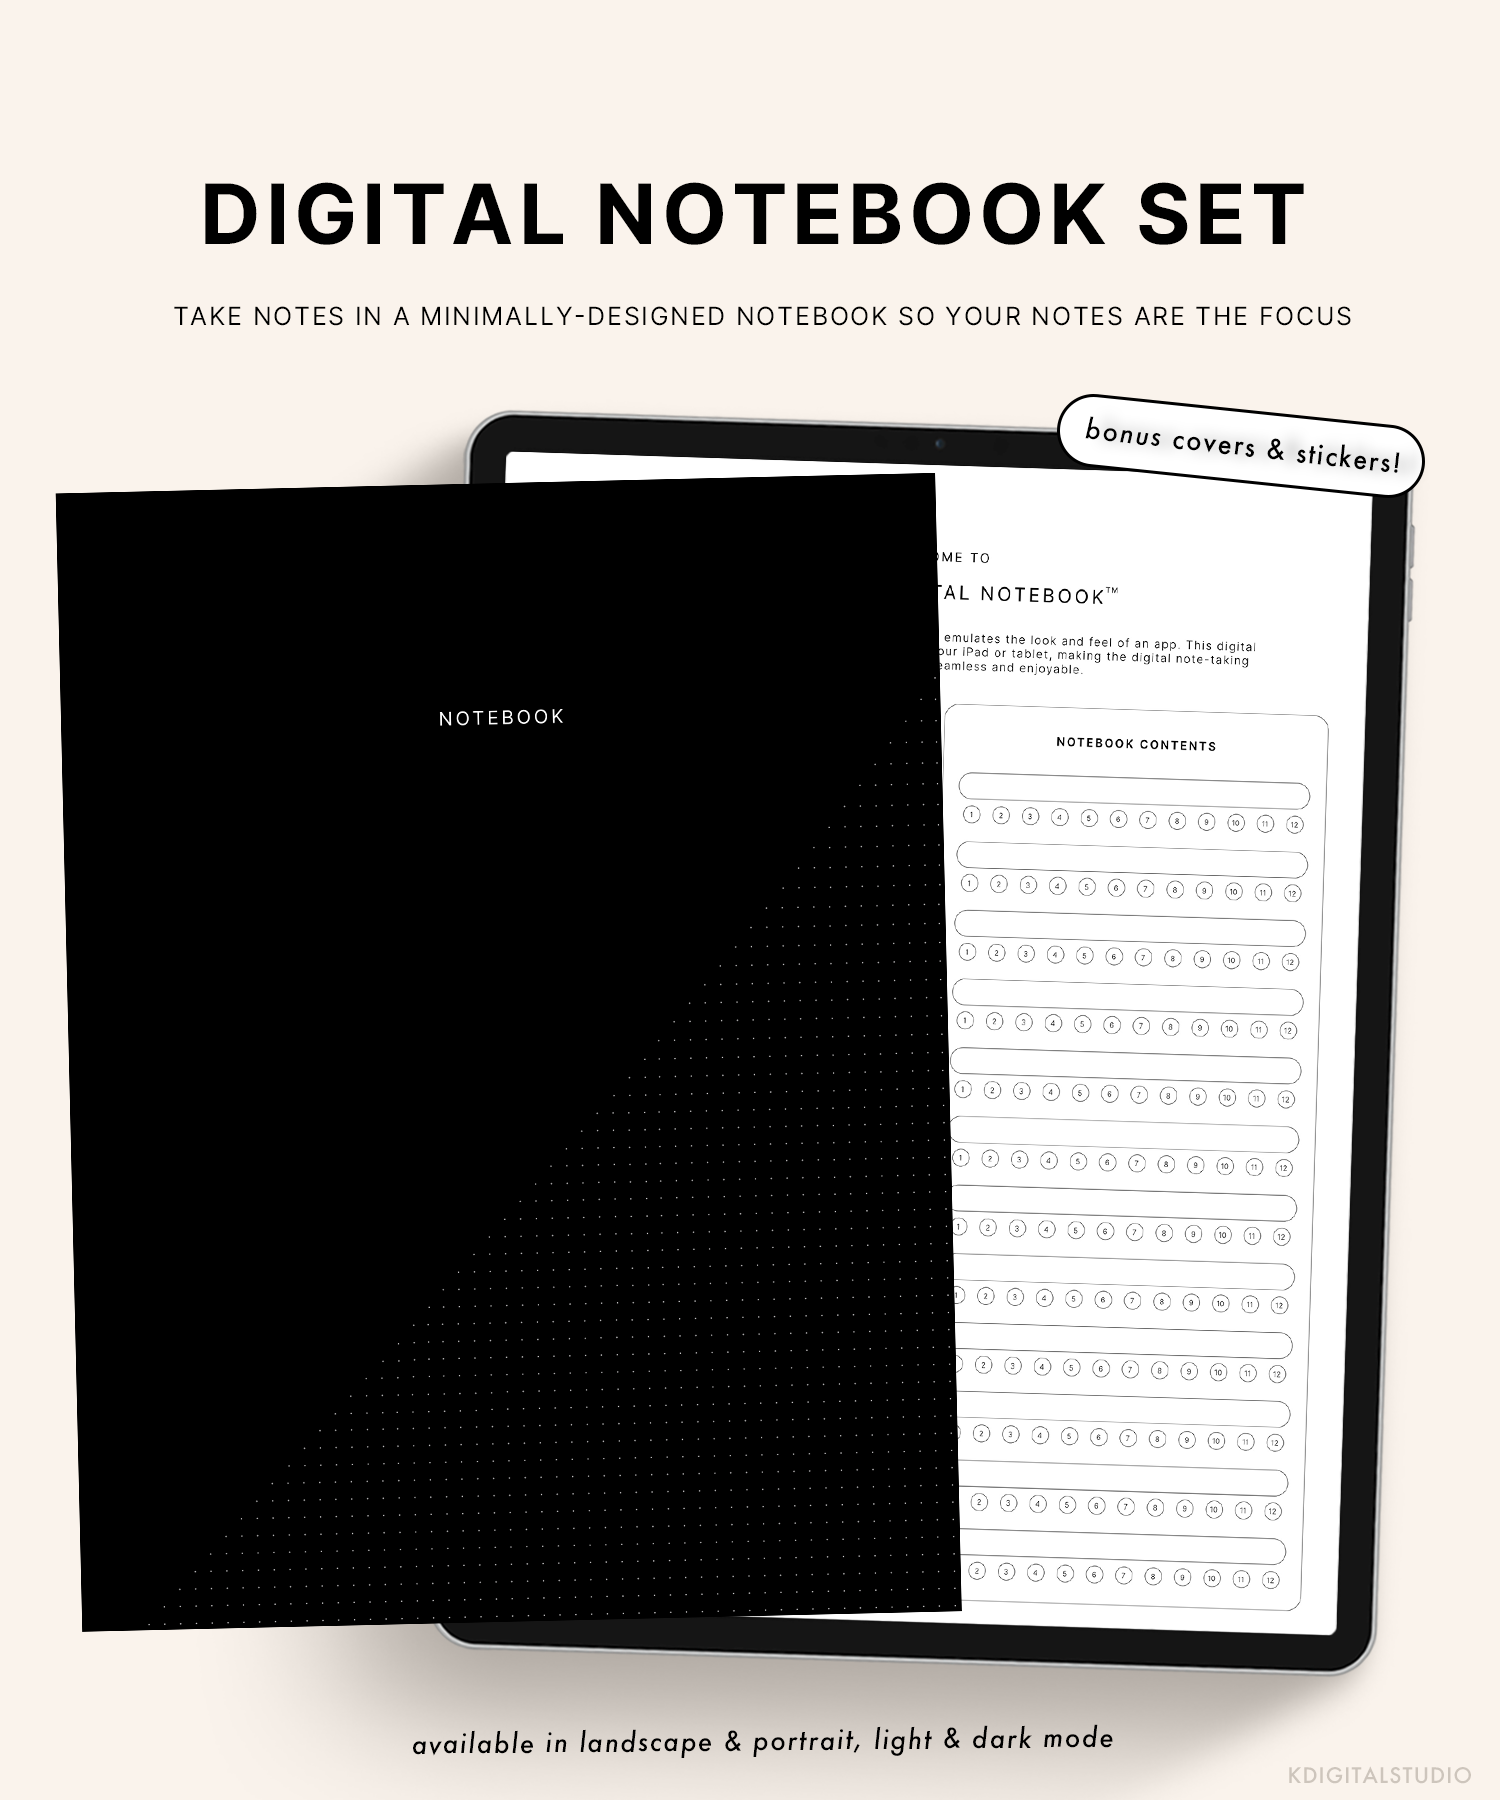 HOW TO TAKE PRETTY AND NEAT NOTES  Aesthetic, quick, and effective +  Notebook Flipthrough 